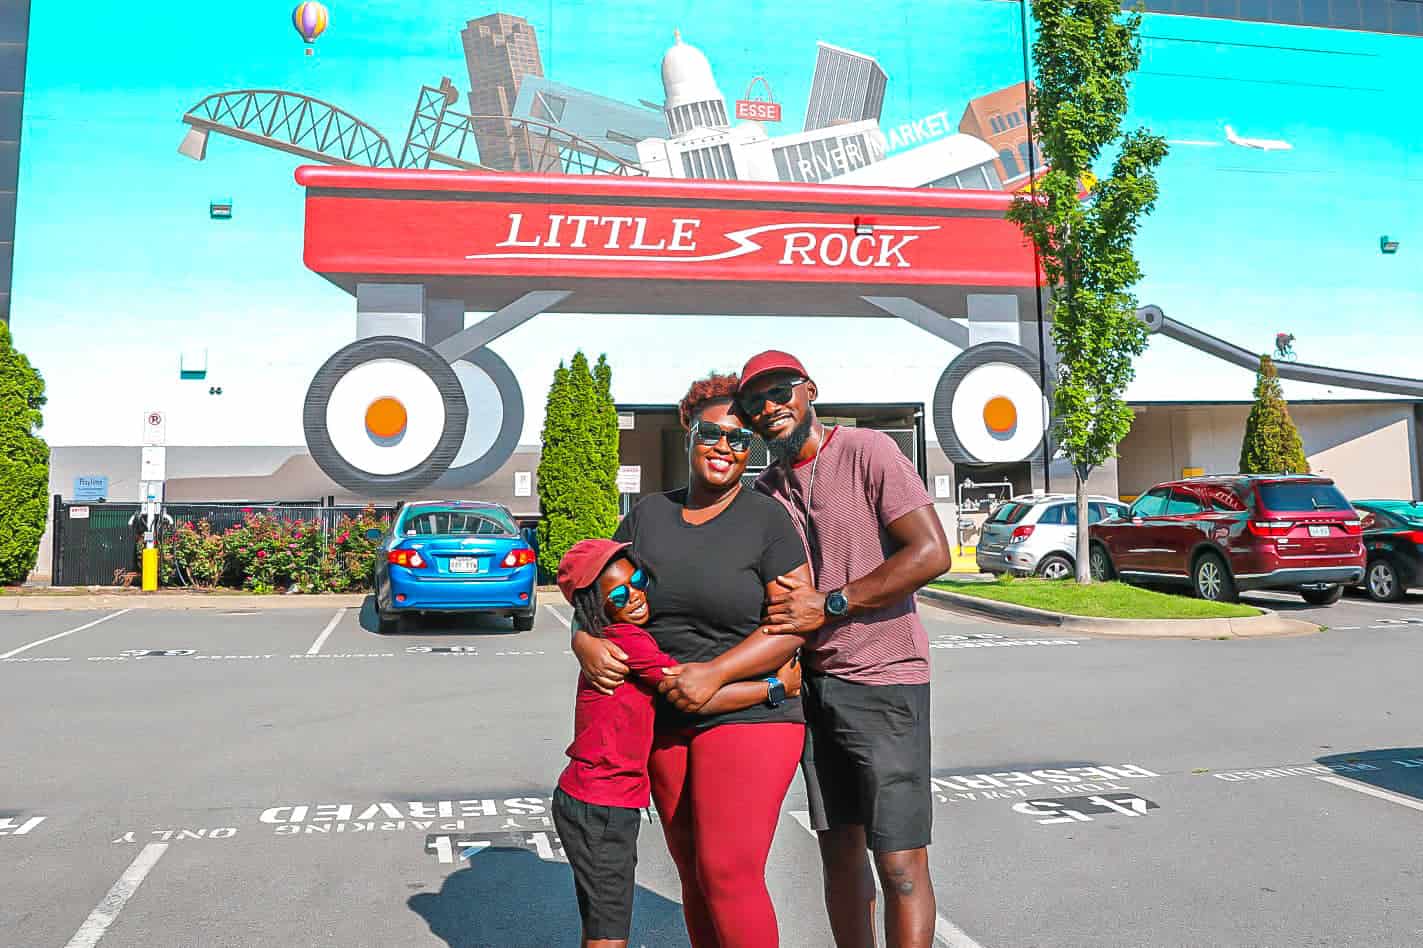 20 + Things To Do In Little Rock, Arkansas With or Without Kids